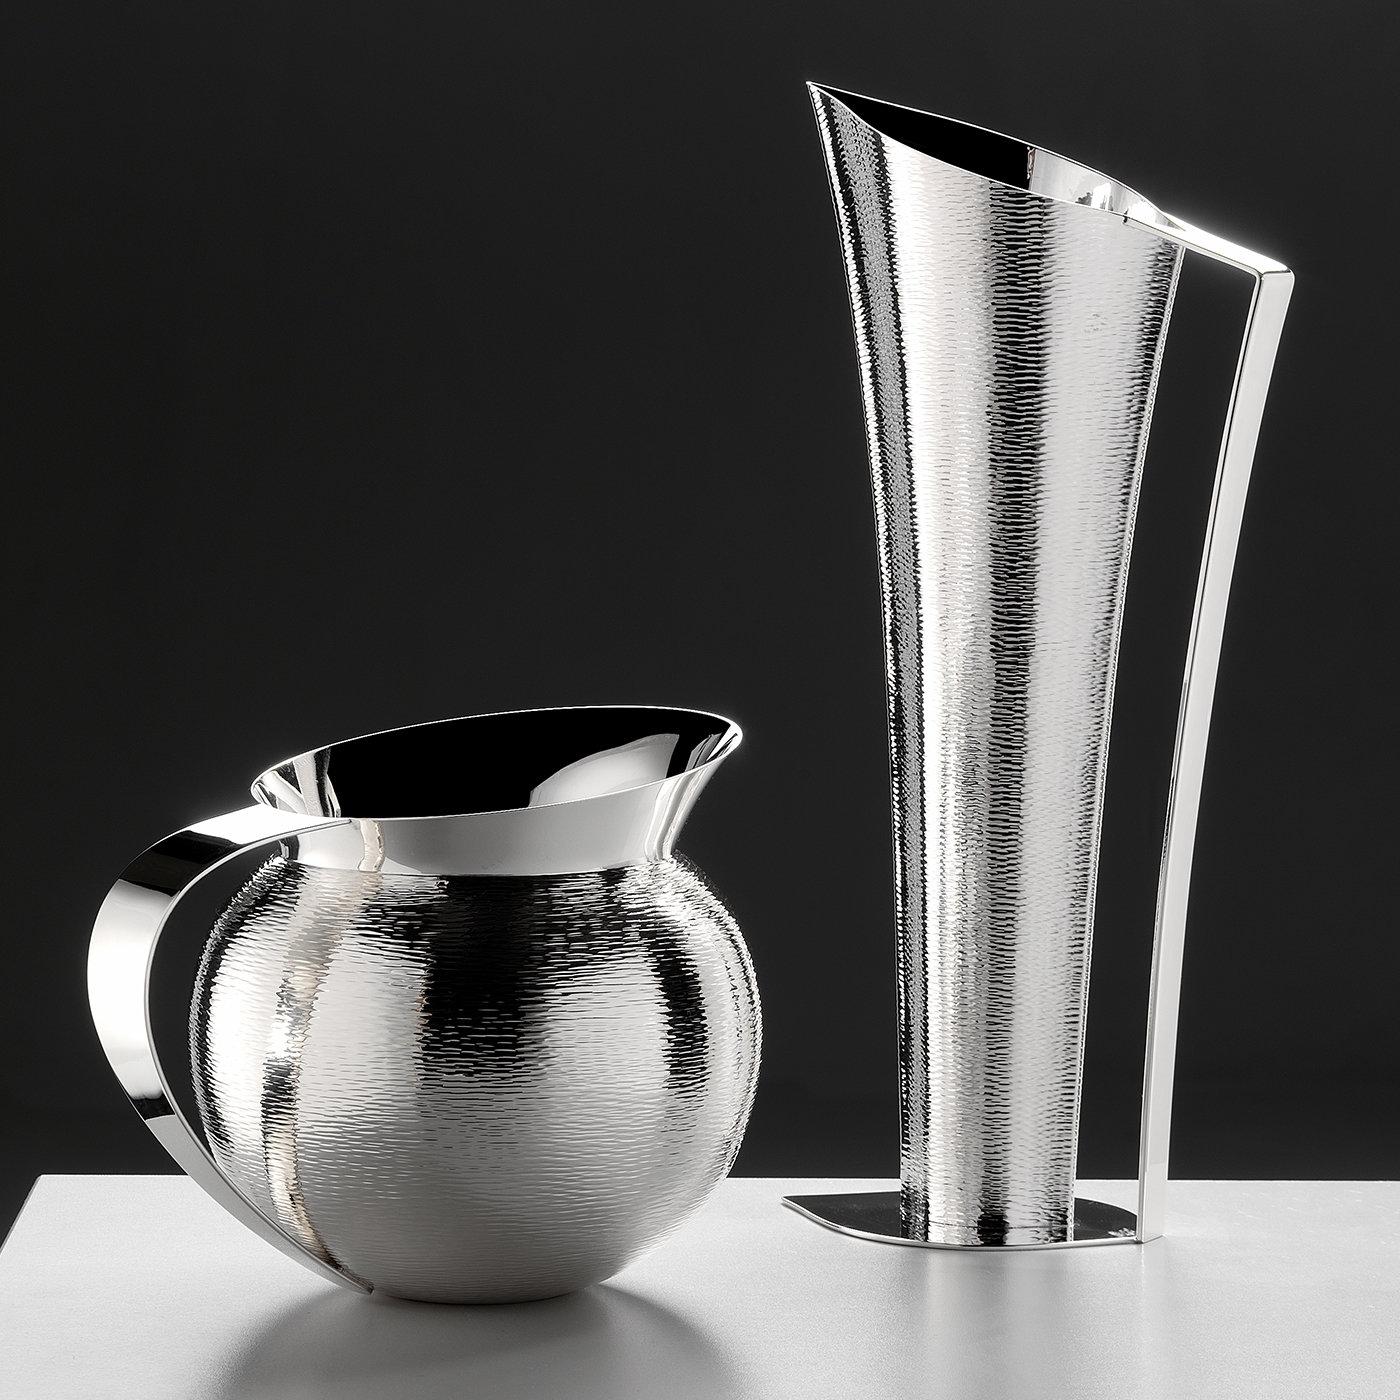 A gorgeous round pitcher with a lustrous shine combined with a dazzling texture is crafted elegantly in a silver-plated alloy.